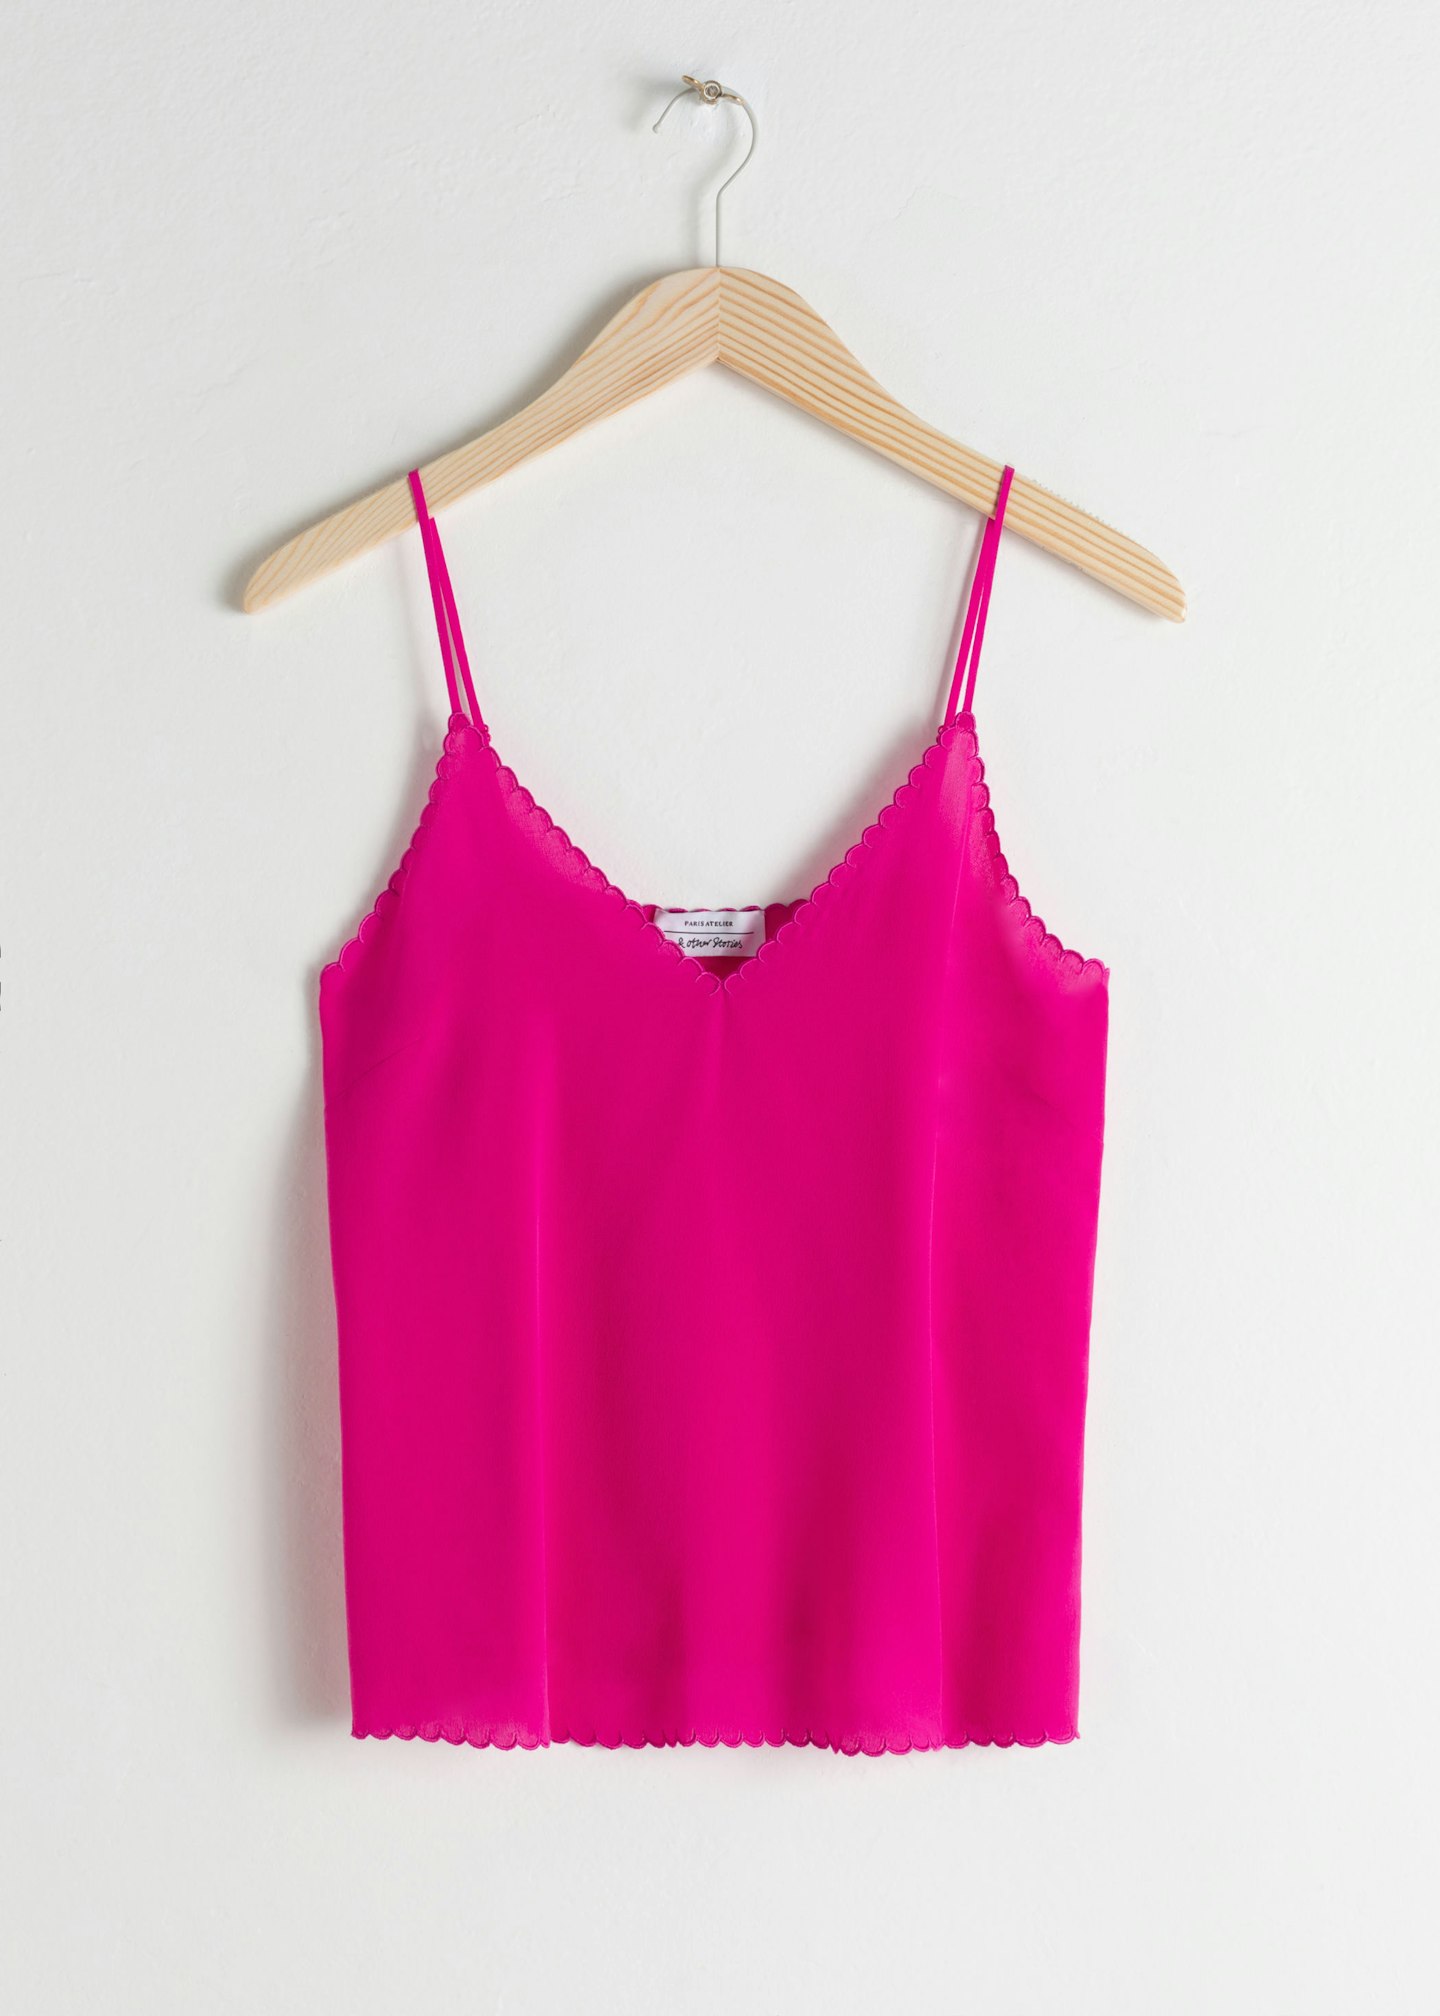 & Other Stories, Scalloped Silk Tank Top, £55